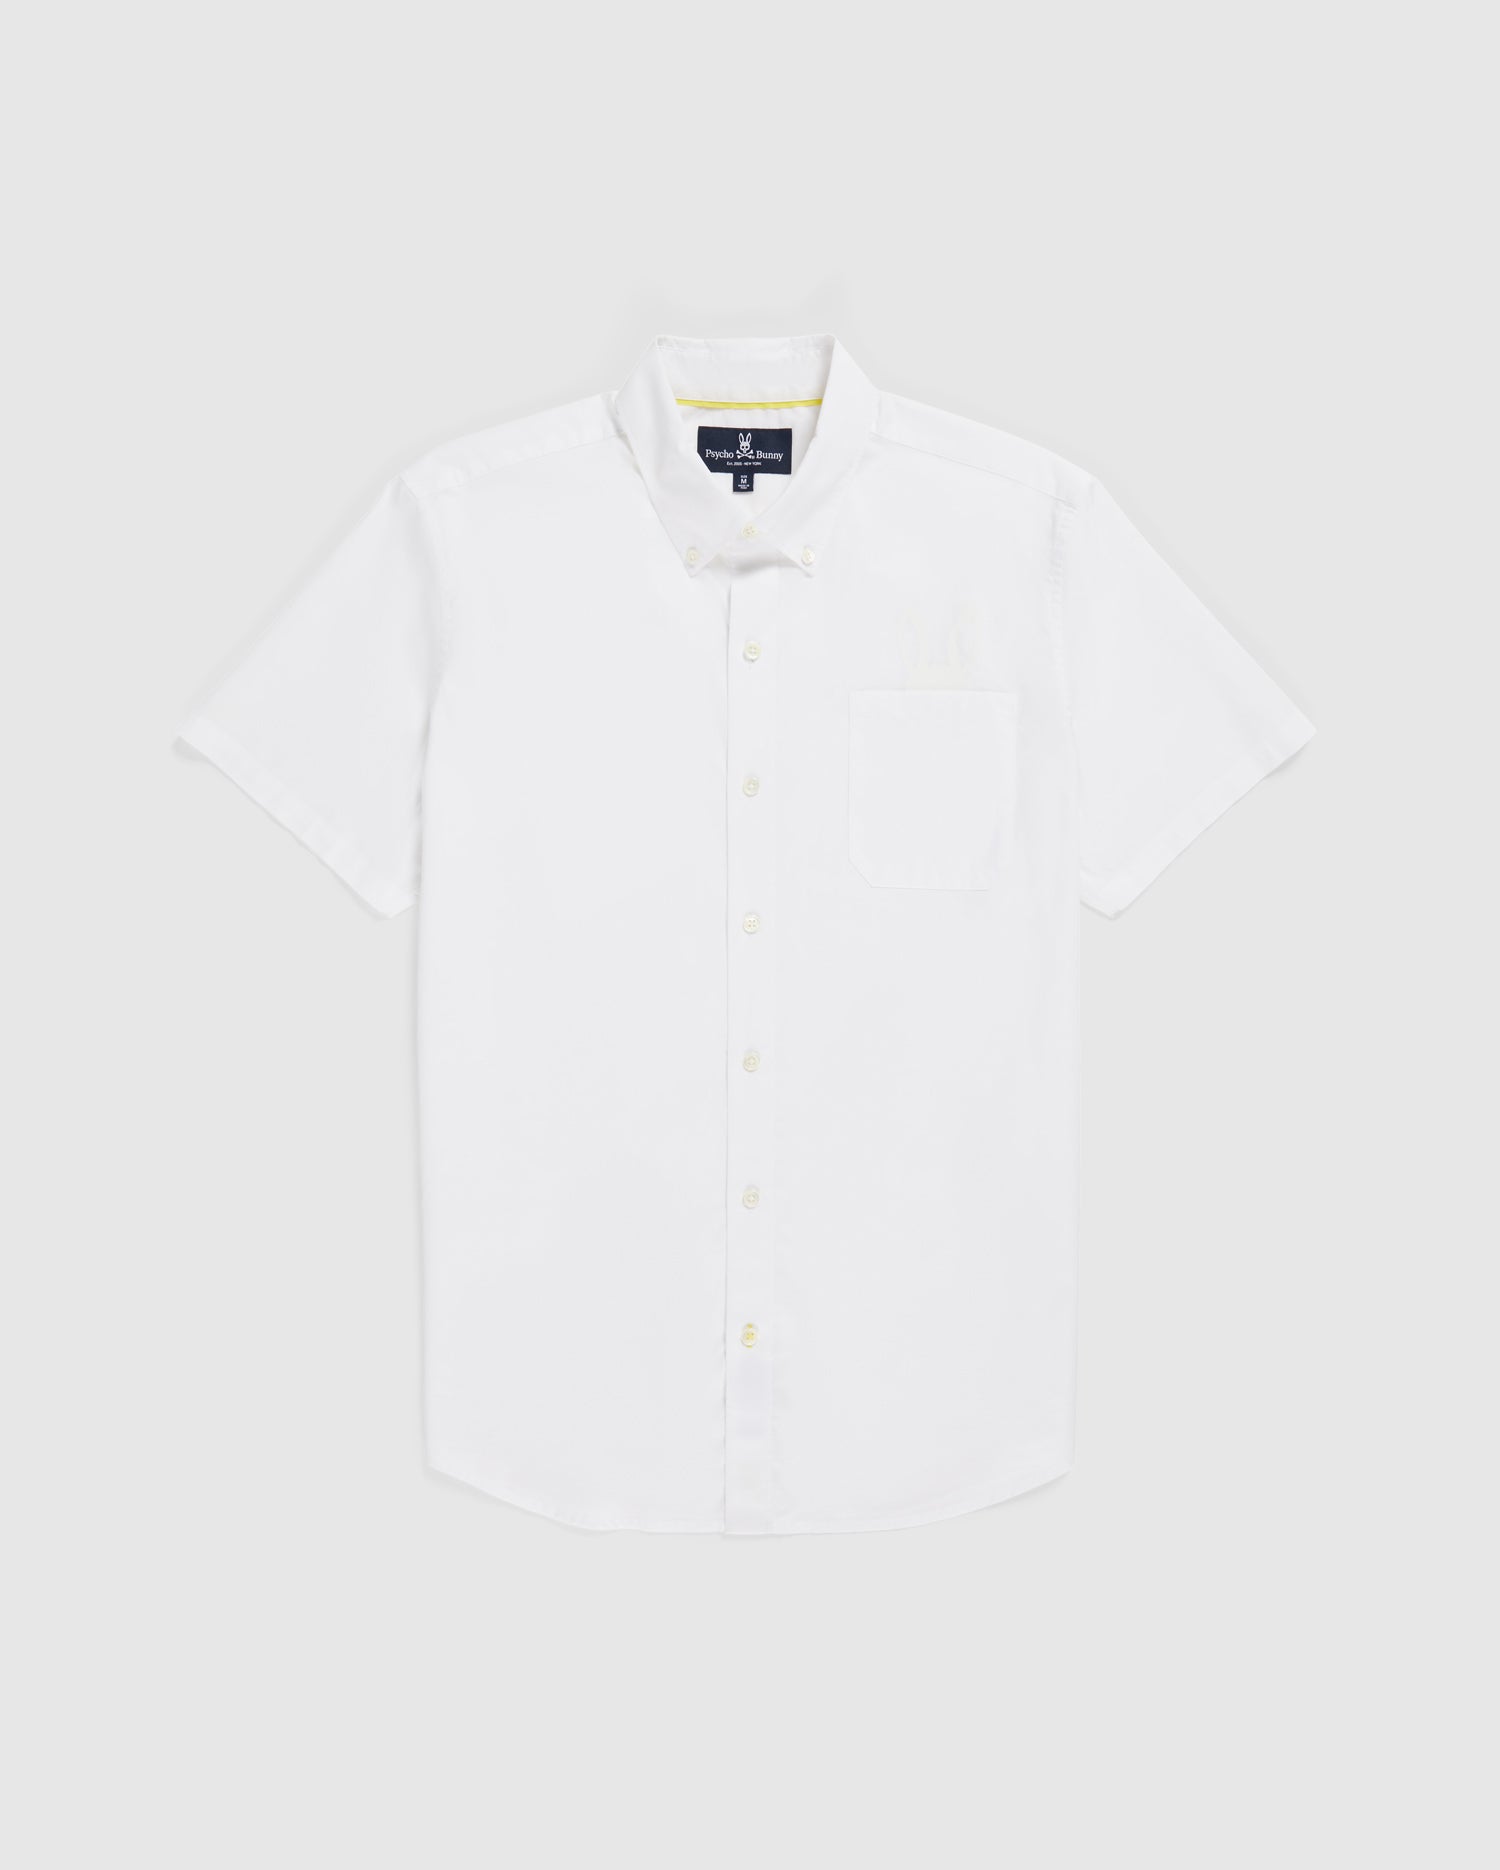 Shop Men's Short Sleeve Shirt in White | Comfortable and Stylish ...